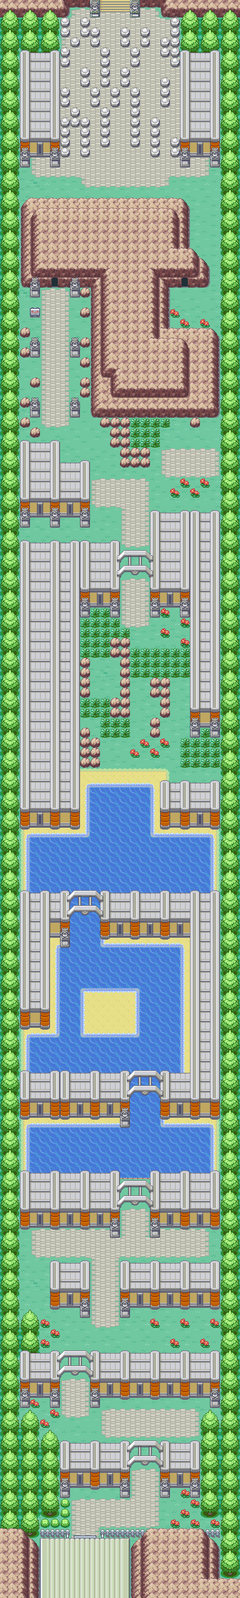 Route 23.